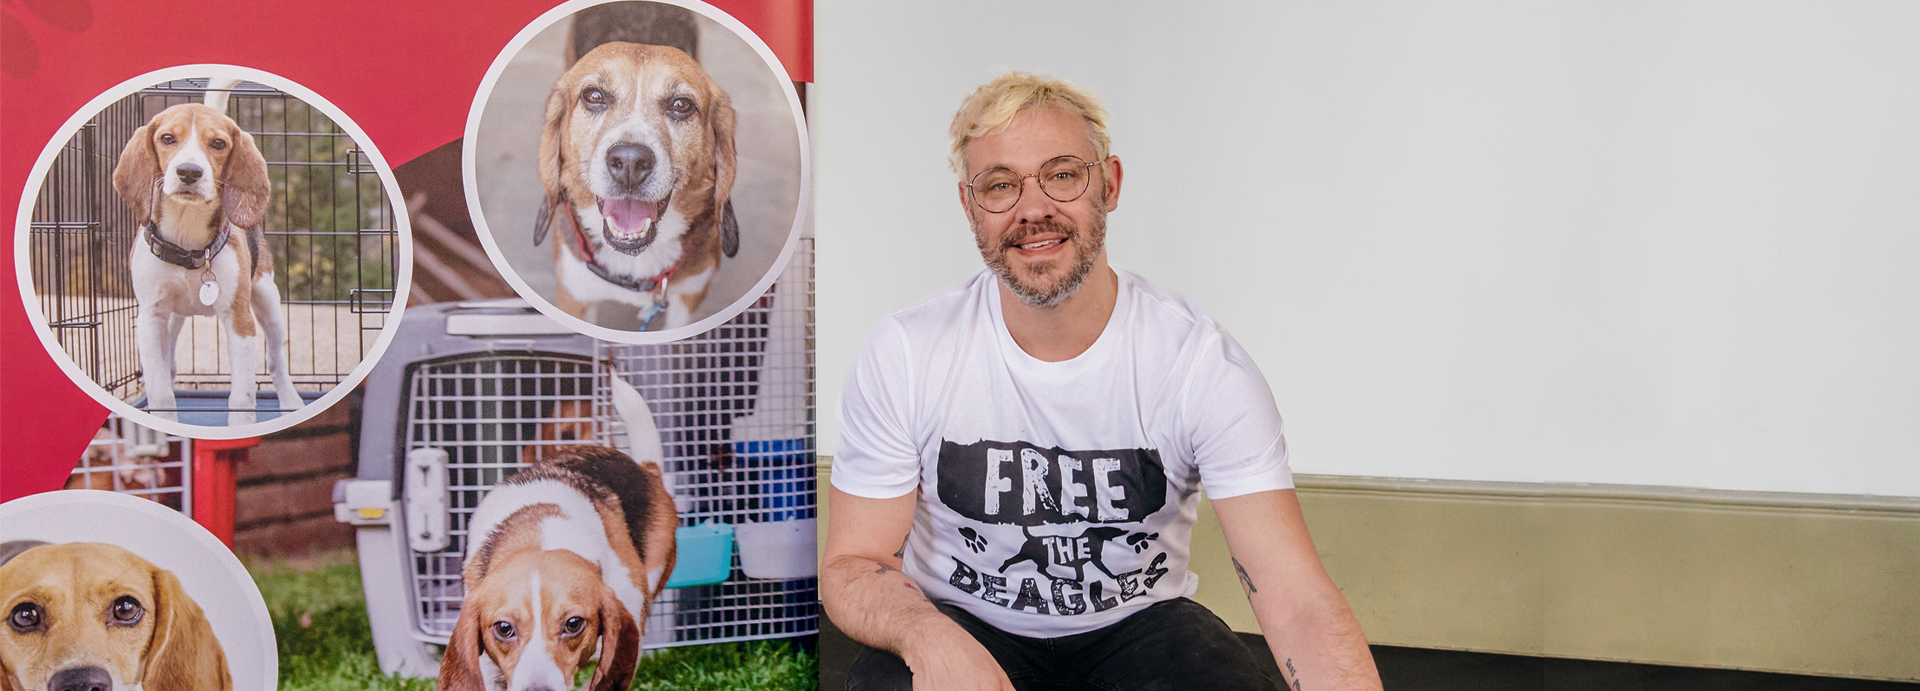 Pop star Will Young calls on MBR Acres to allow rehoming of dogs